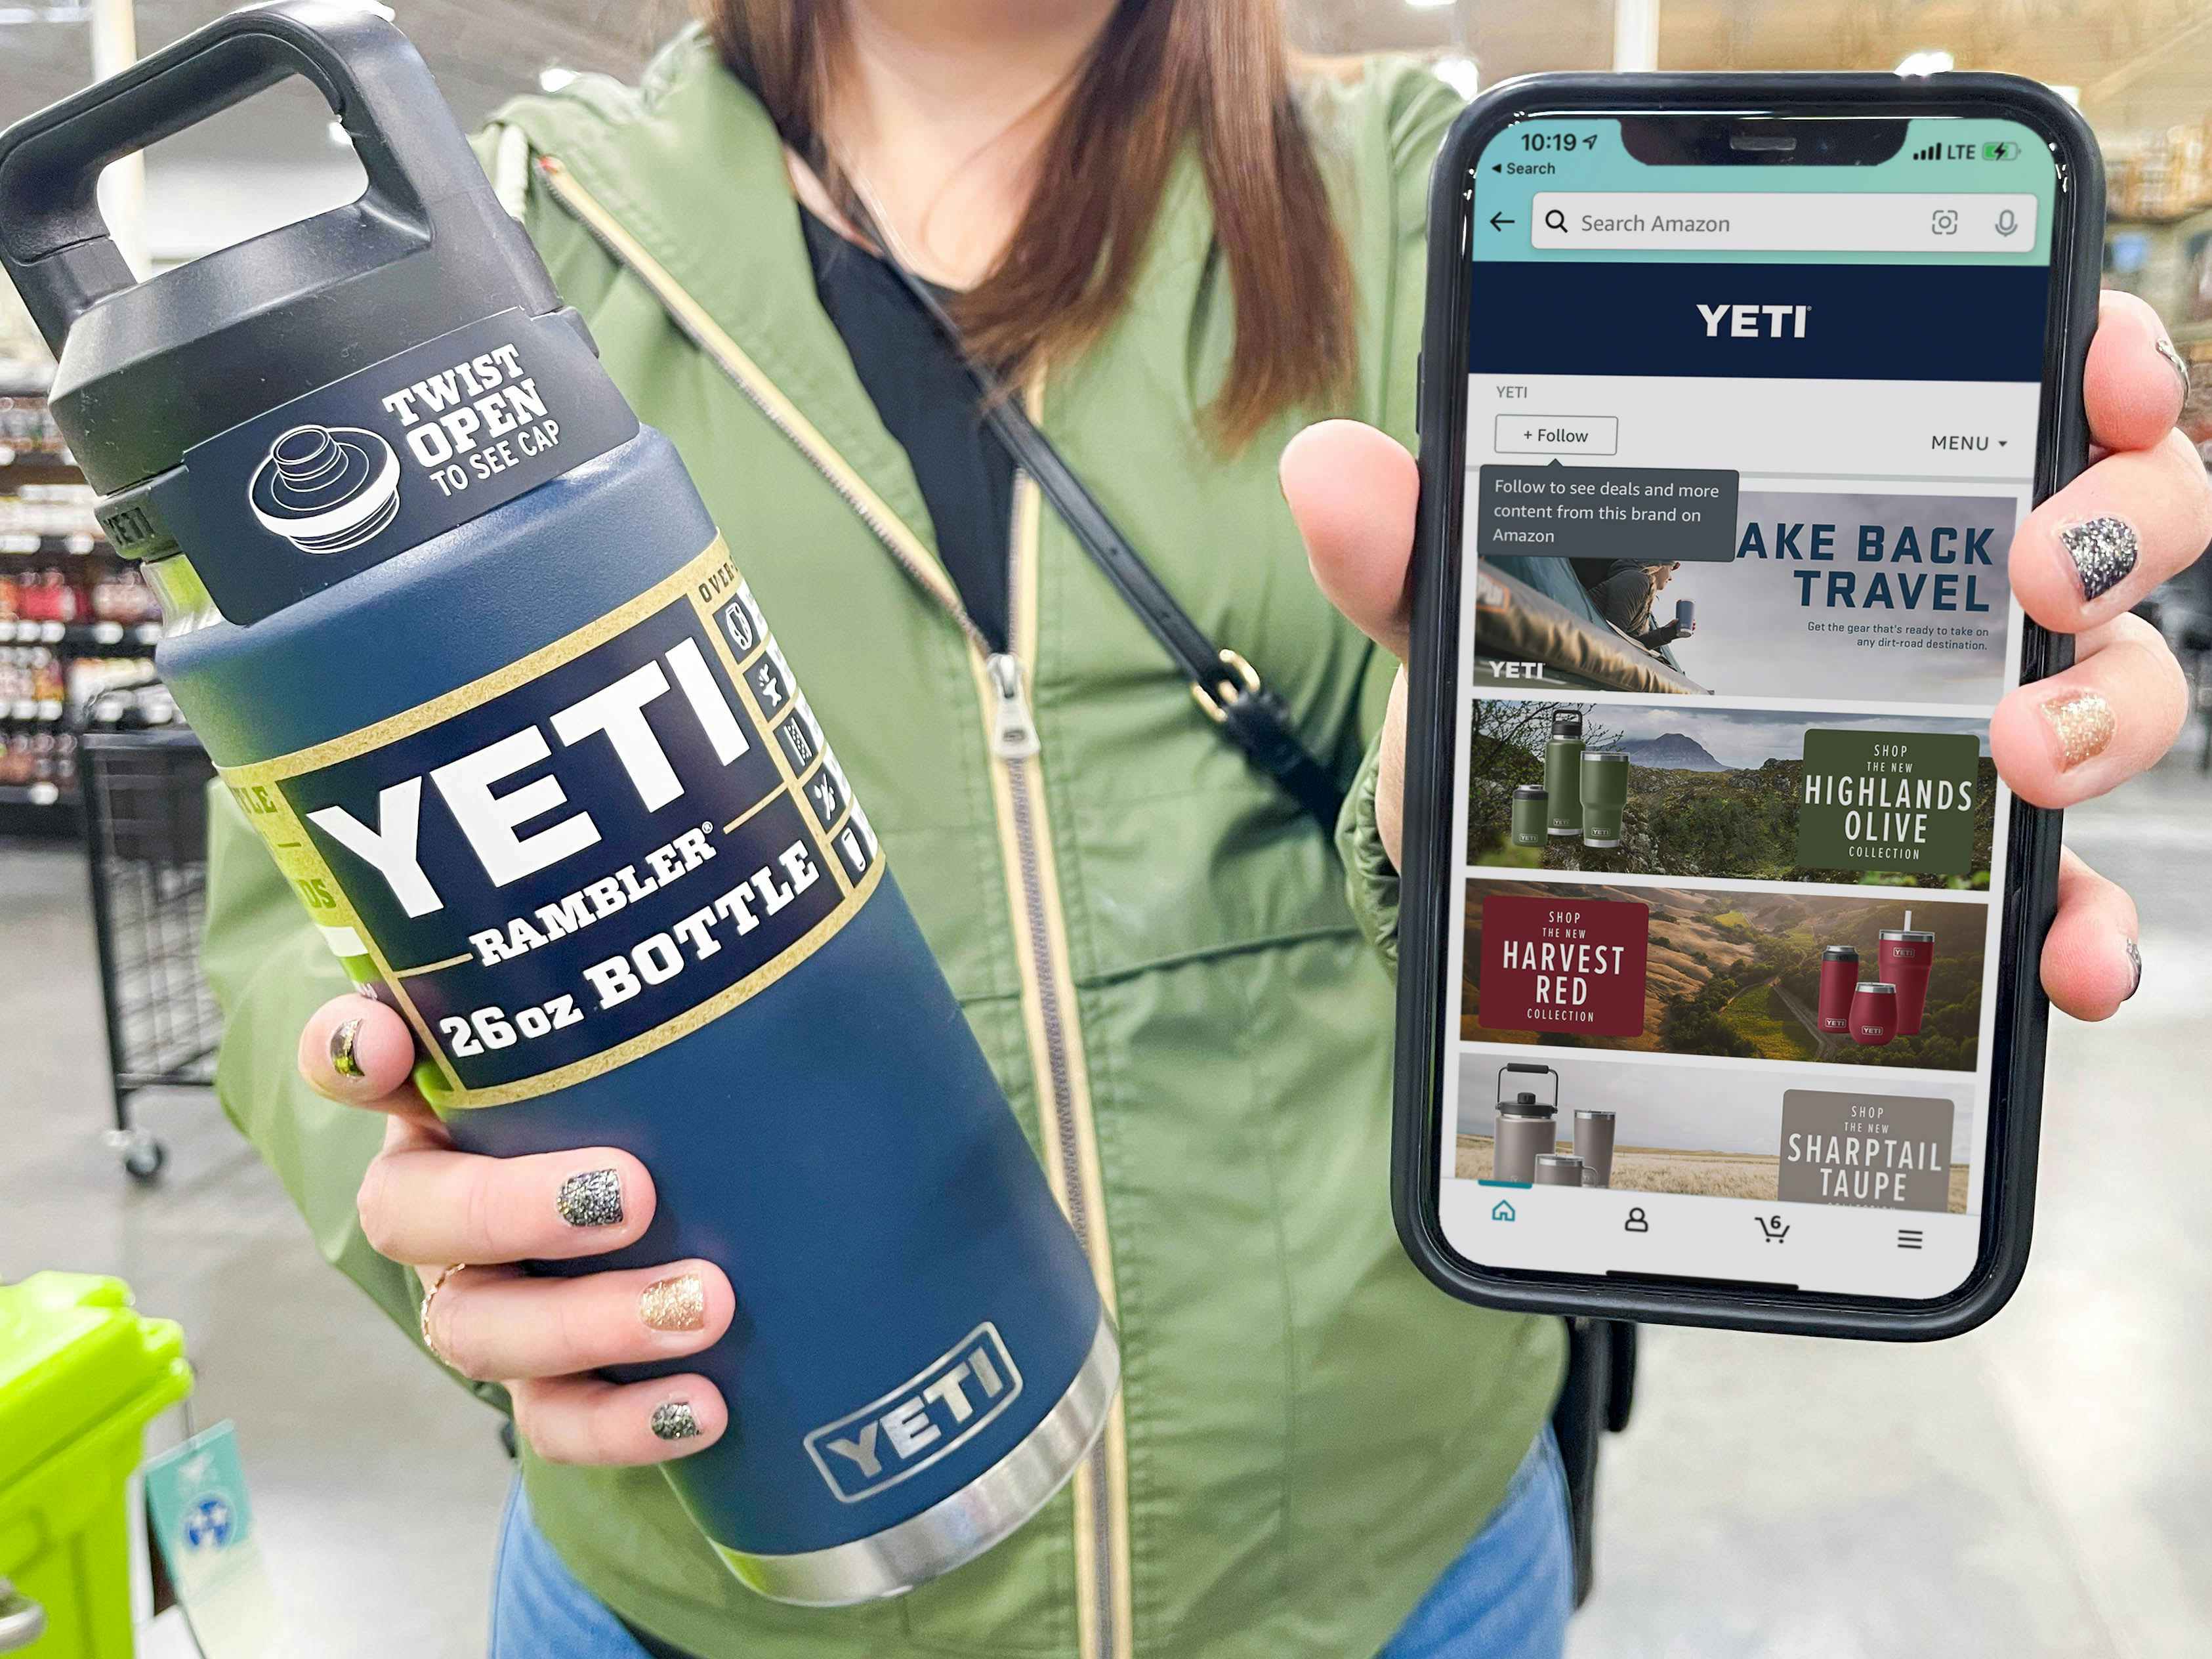 A person holding up a Yeti Rambler water bottle and an iPhone with the Amazon app open to the Yeti shopping page.